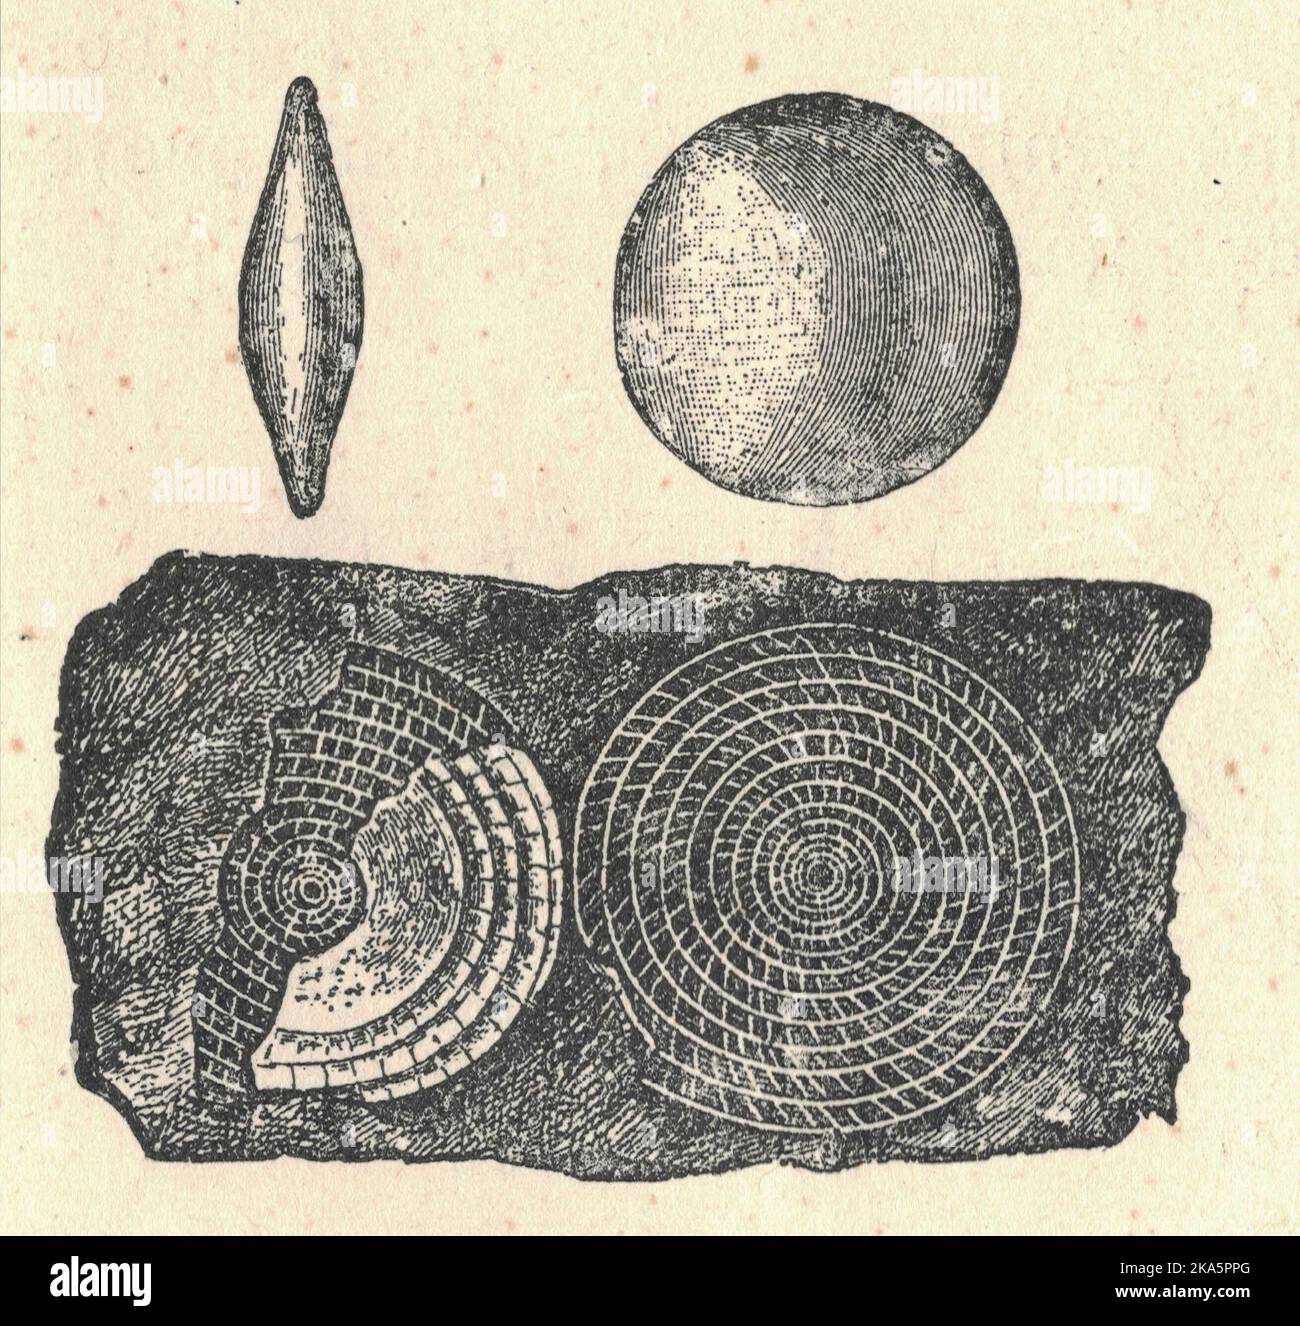 Antique engraved illustration of the fossilized foraminiferas. Vintage illustration of the fossilized foraminiferas. Old picture. Book illustration published 1907. Foraminifera are amoeba-like, single-celled protists (very simple micro-organisms). They have been called ‘armoured amoebae’ because they secrete a tiny shell (or ‘test’) usually between about a half and one millimetre long. They get their name from the foramen, an opening or tube that interconnects all the chambers of the test. Fossilised tests are found in sediments as old as the earliest Cambrian (about 545 million years ago) and Stock Photo